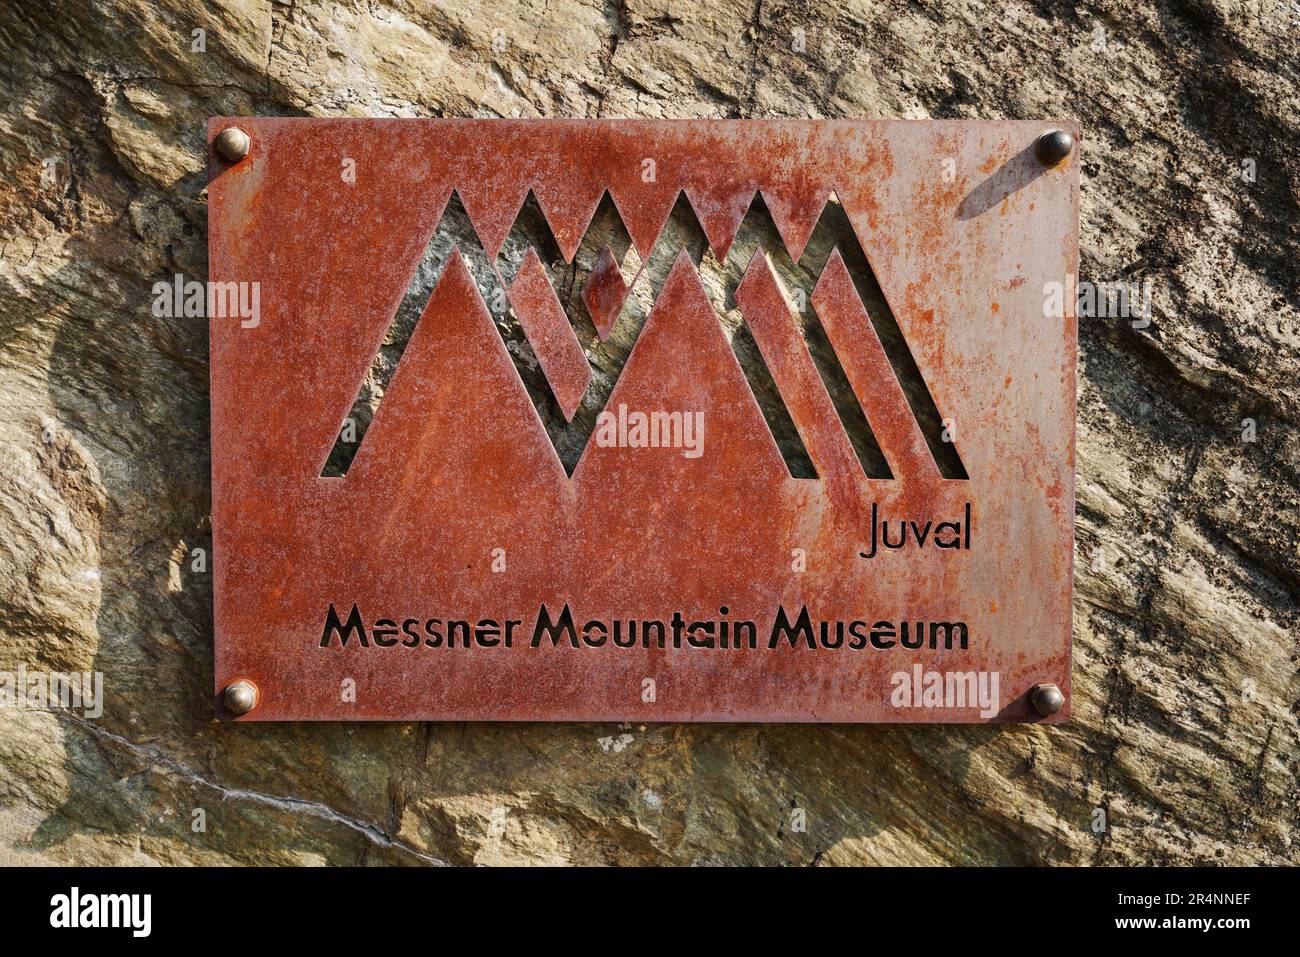 JUVAL CASTLE, NATURNS, KASTELBELL-TSCHARS, SOUTH TYROL, ITALY - MARCH, 2023: Messner Mountain Museum at Juval Castle. Stock Photo